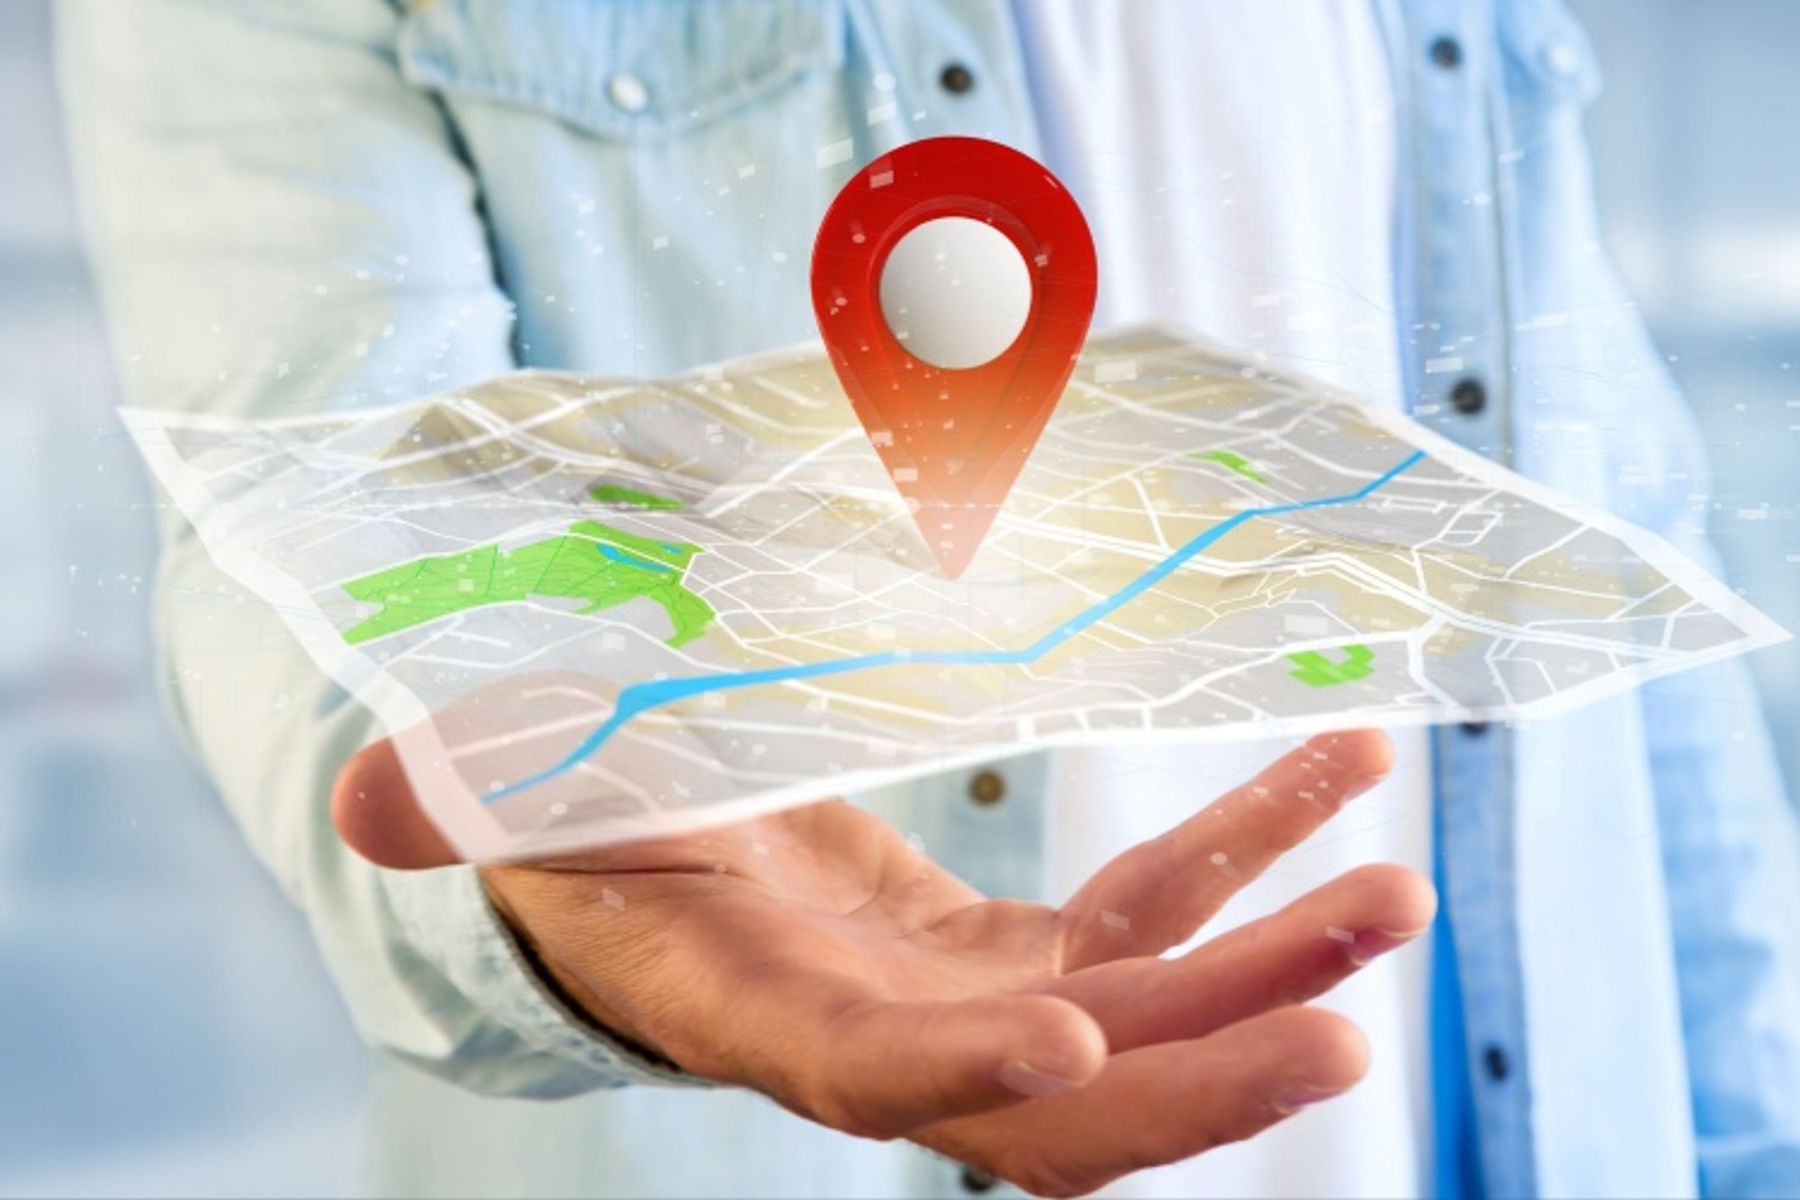 Hyperlocal Advertising: The Cutting Edge in Real Estate Marketing